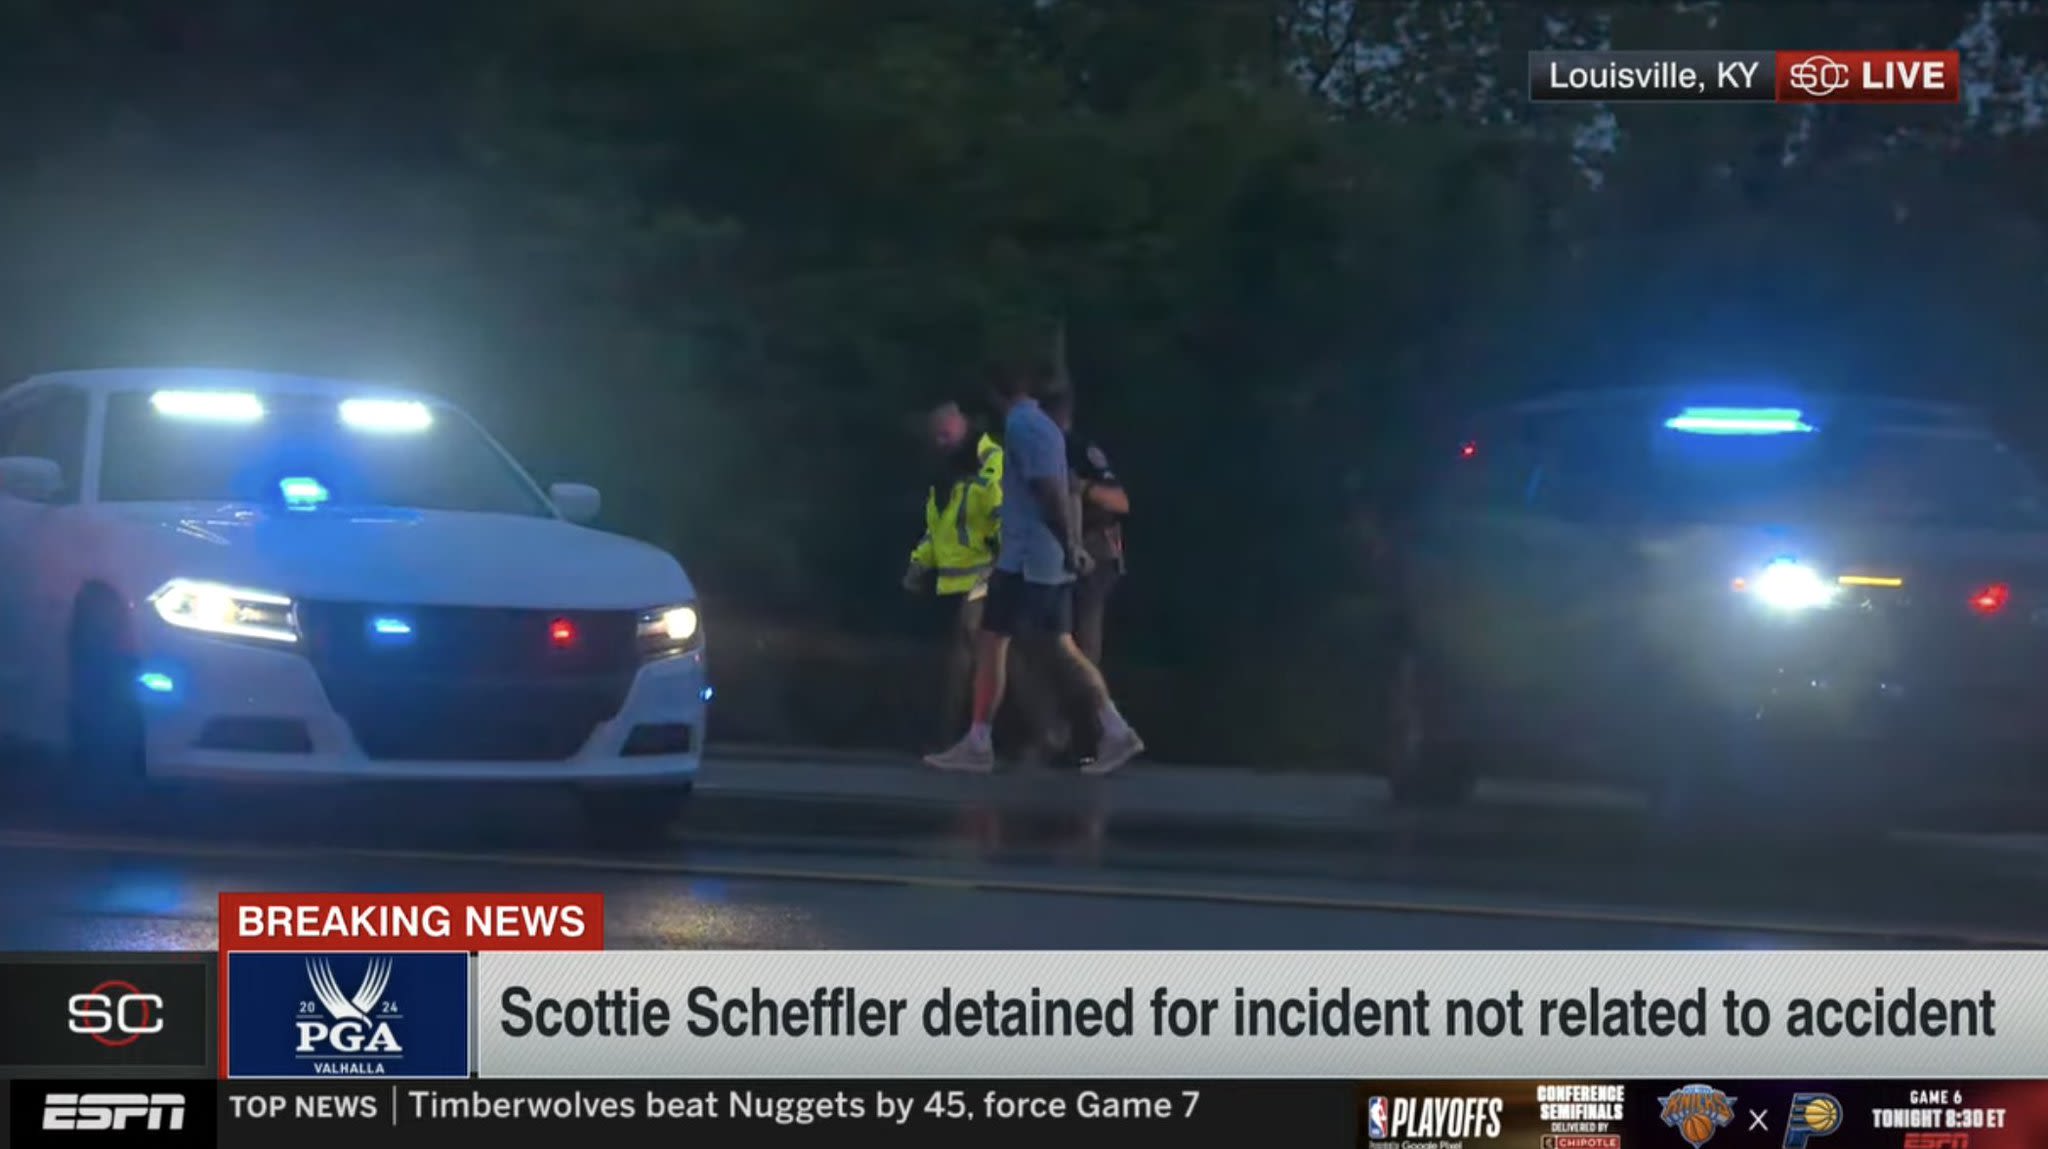 World No. 1 Scottie Scheffler tees off at PGA Championship after being arrested, charged with felony for incident outside Valhalla